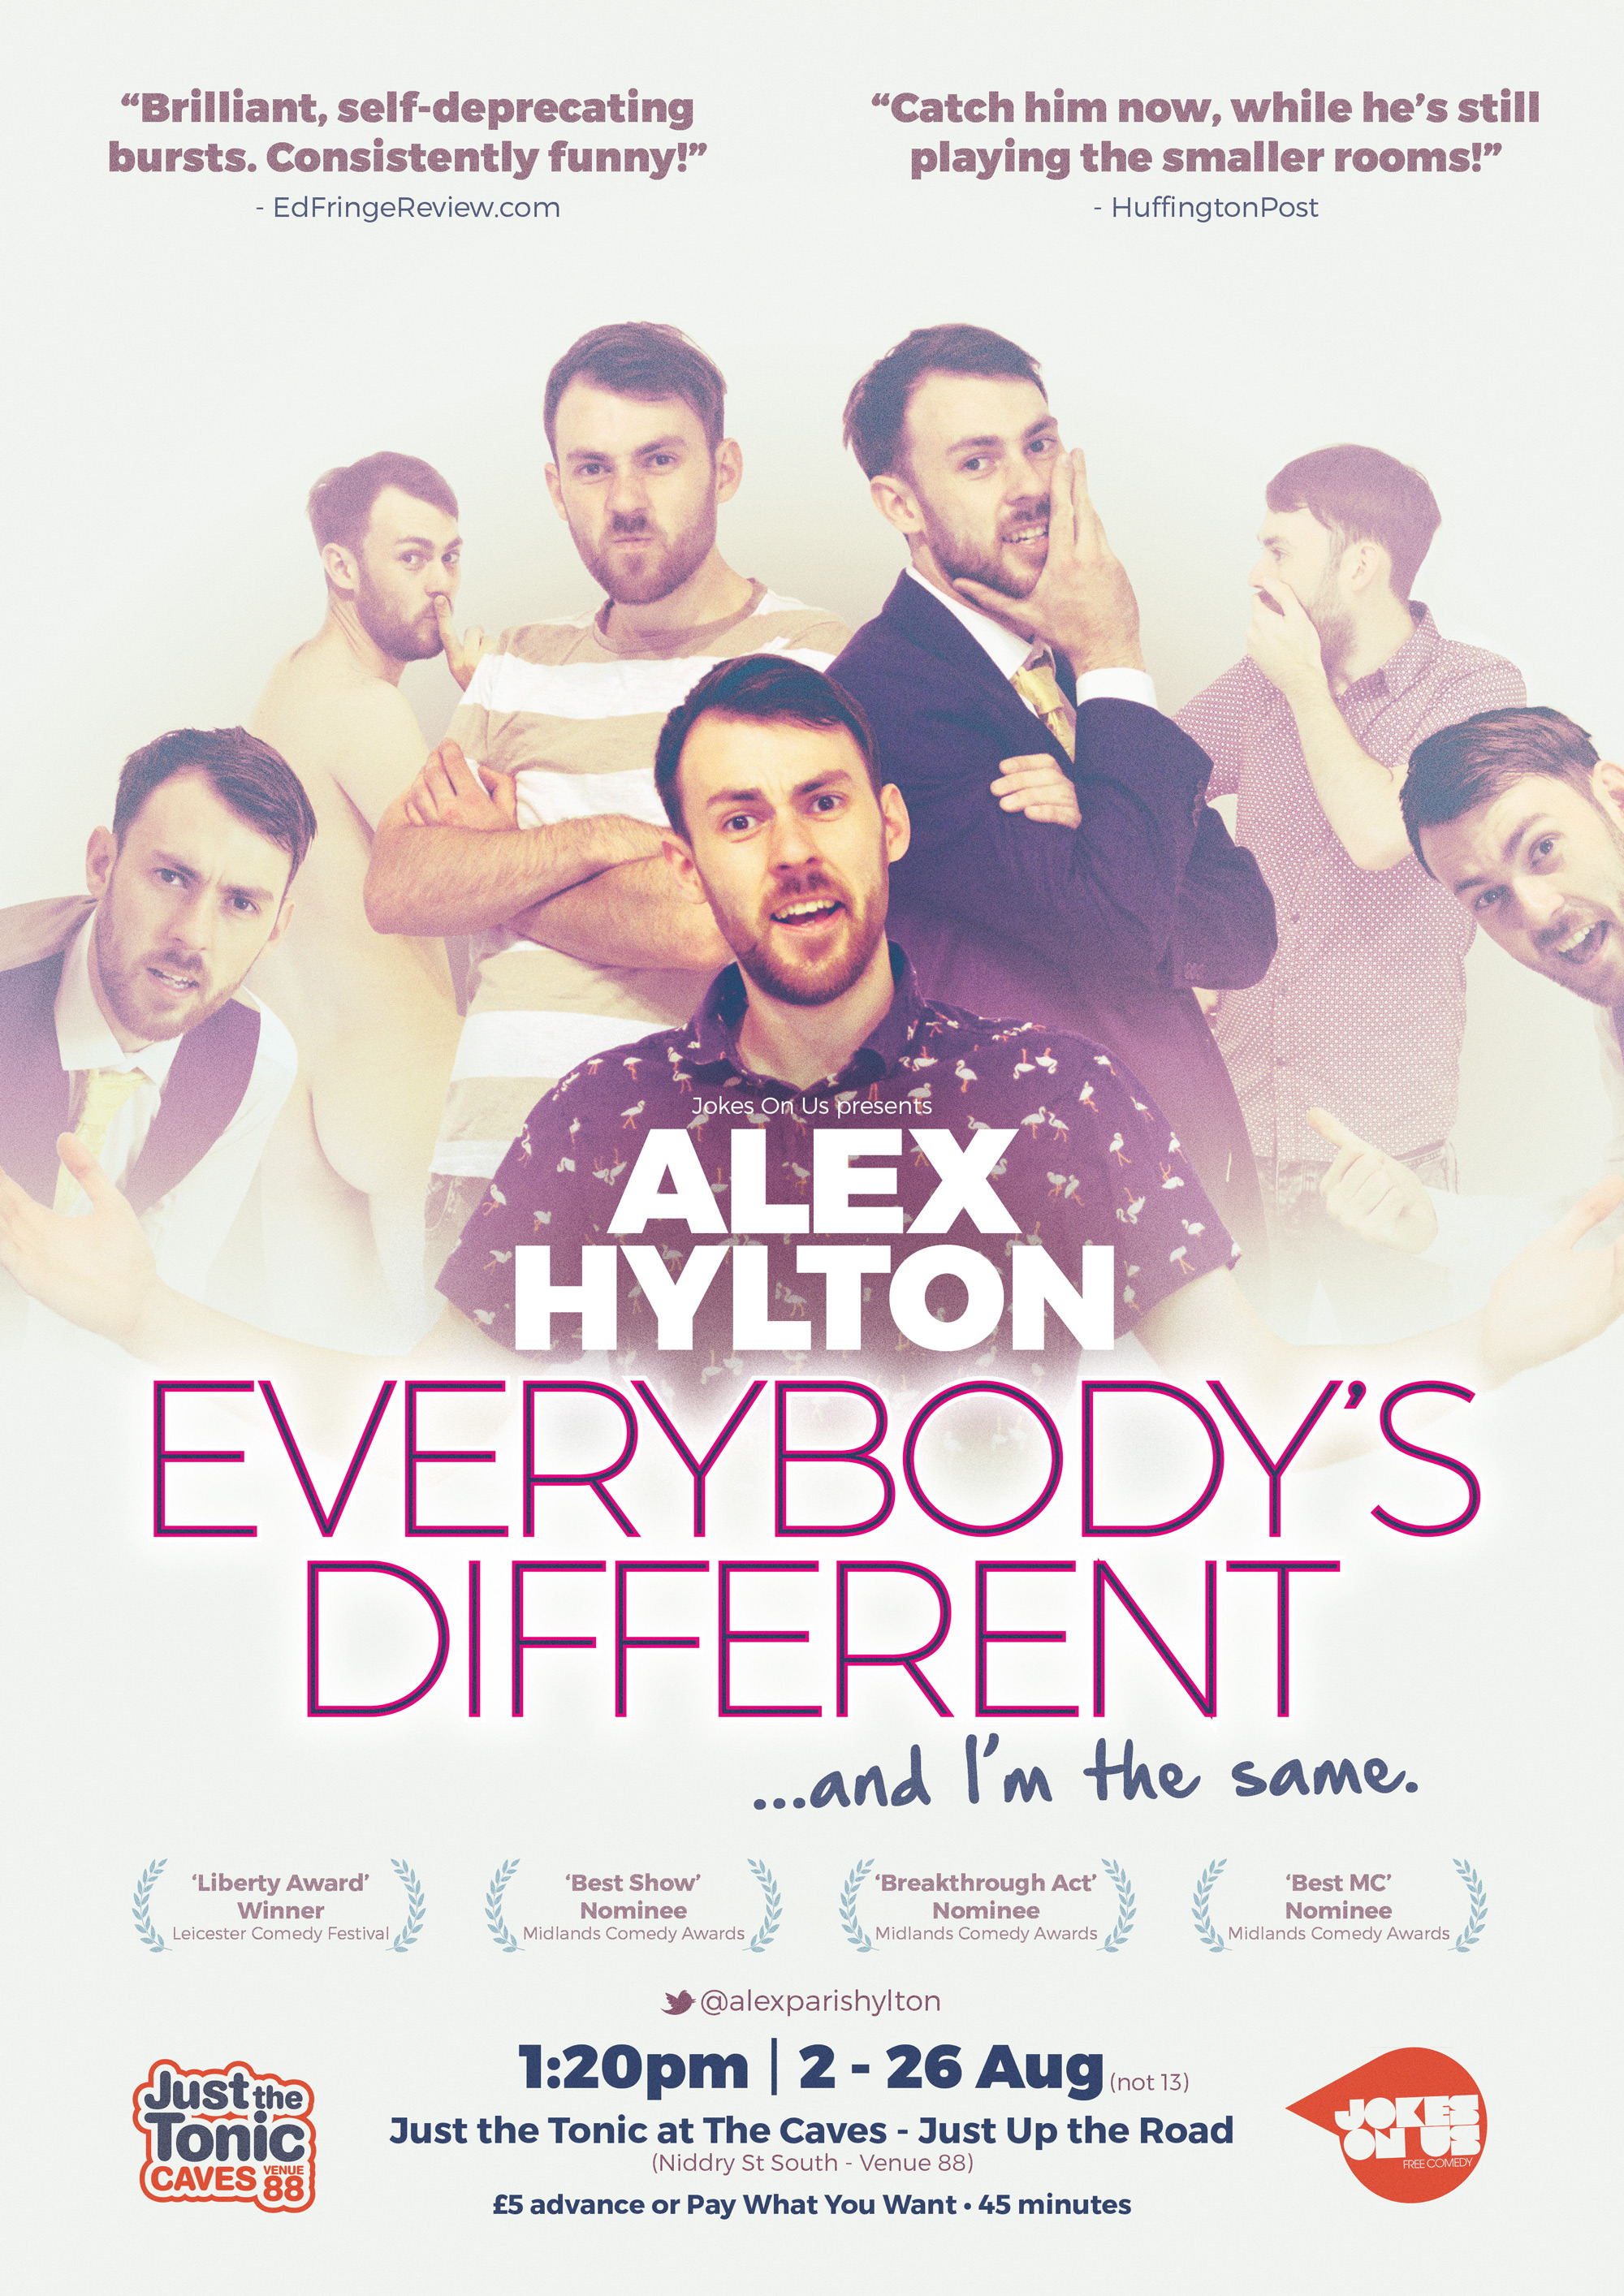 The poster for Alex Hylton: Everybody's Different and I'm the Same